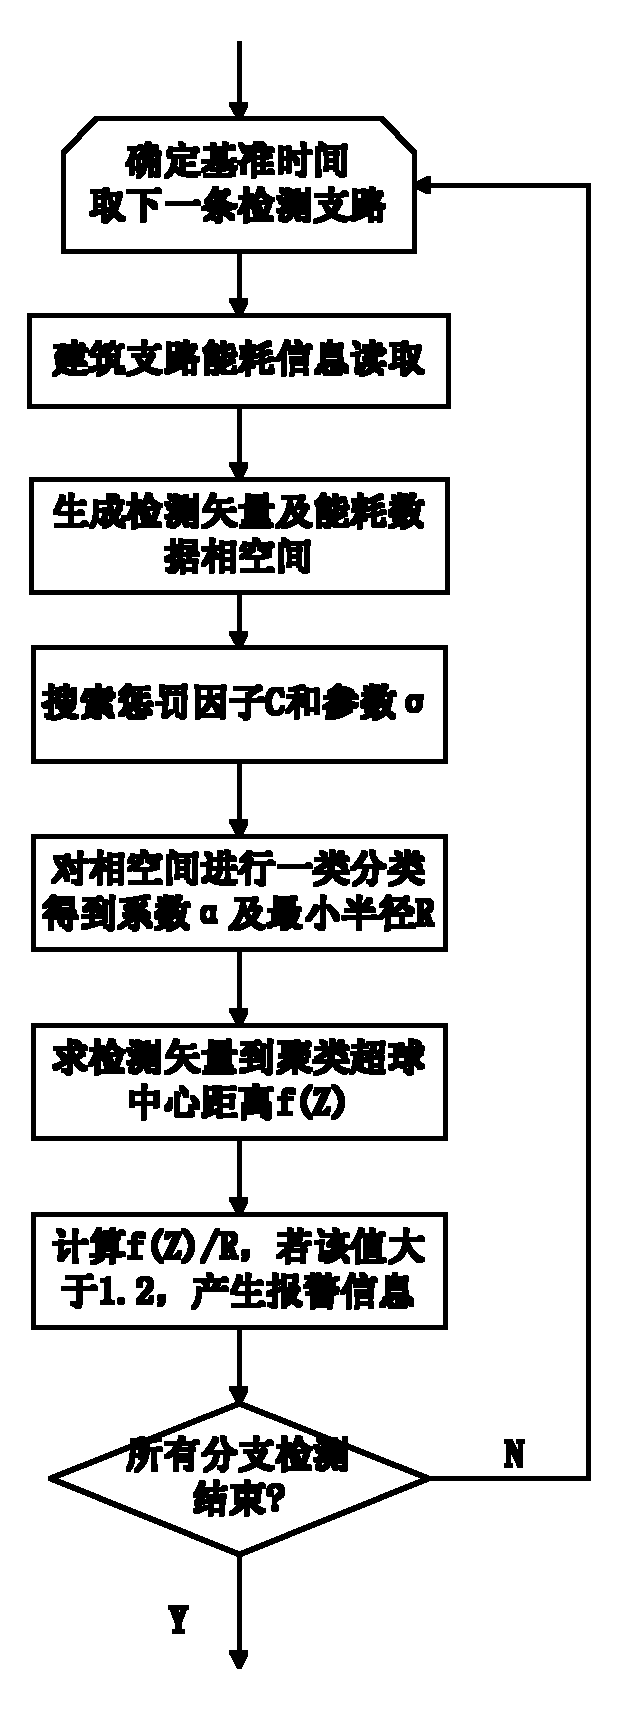 On-line diagnostic method for abnormal energy consumption branch of building